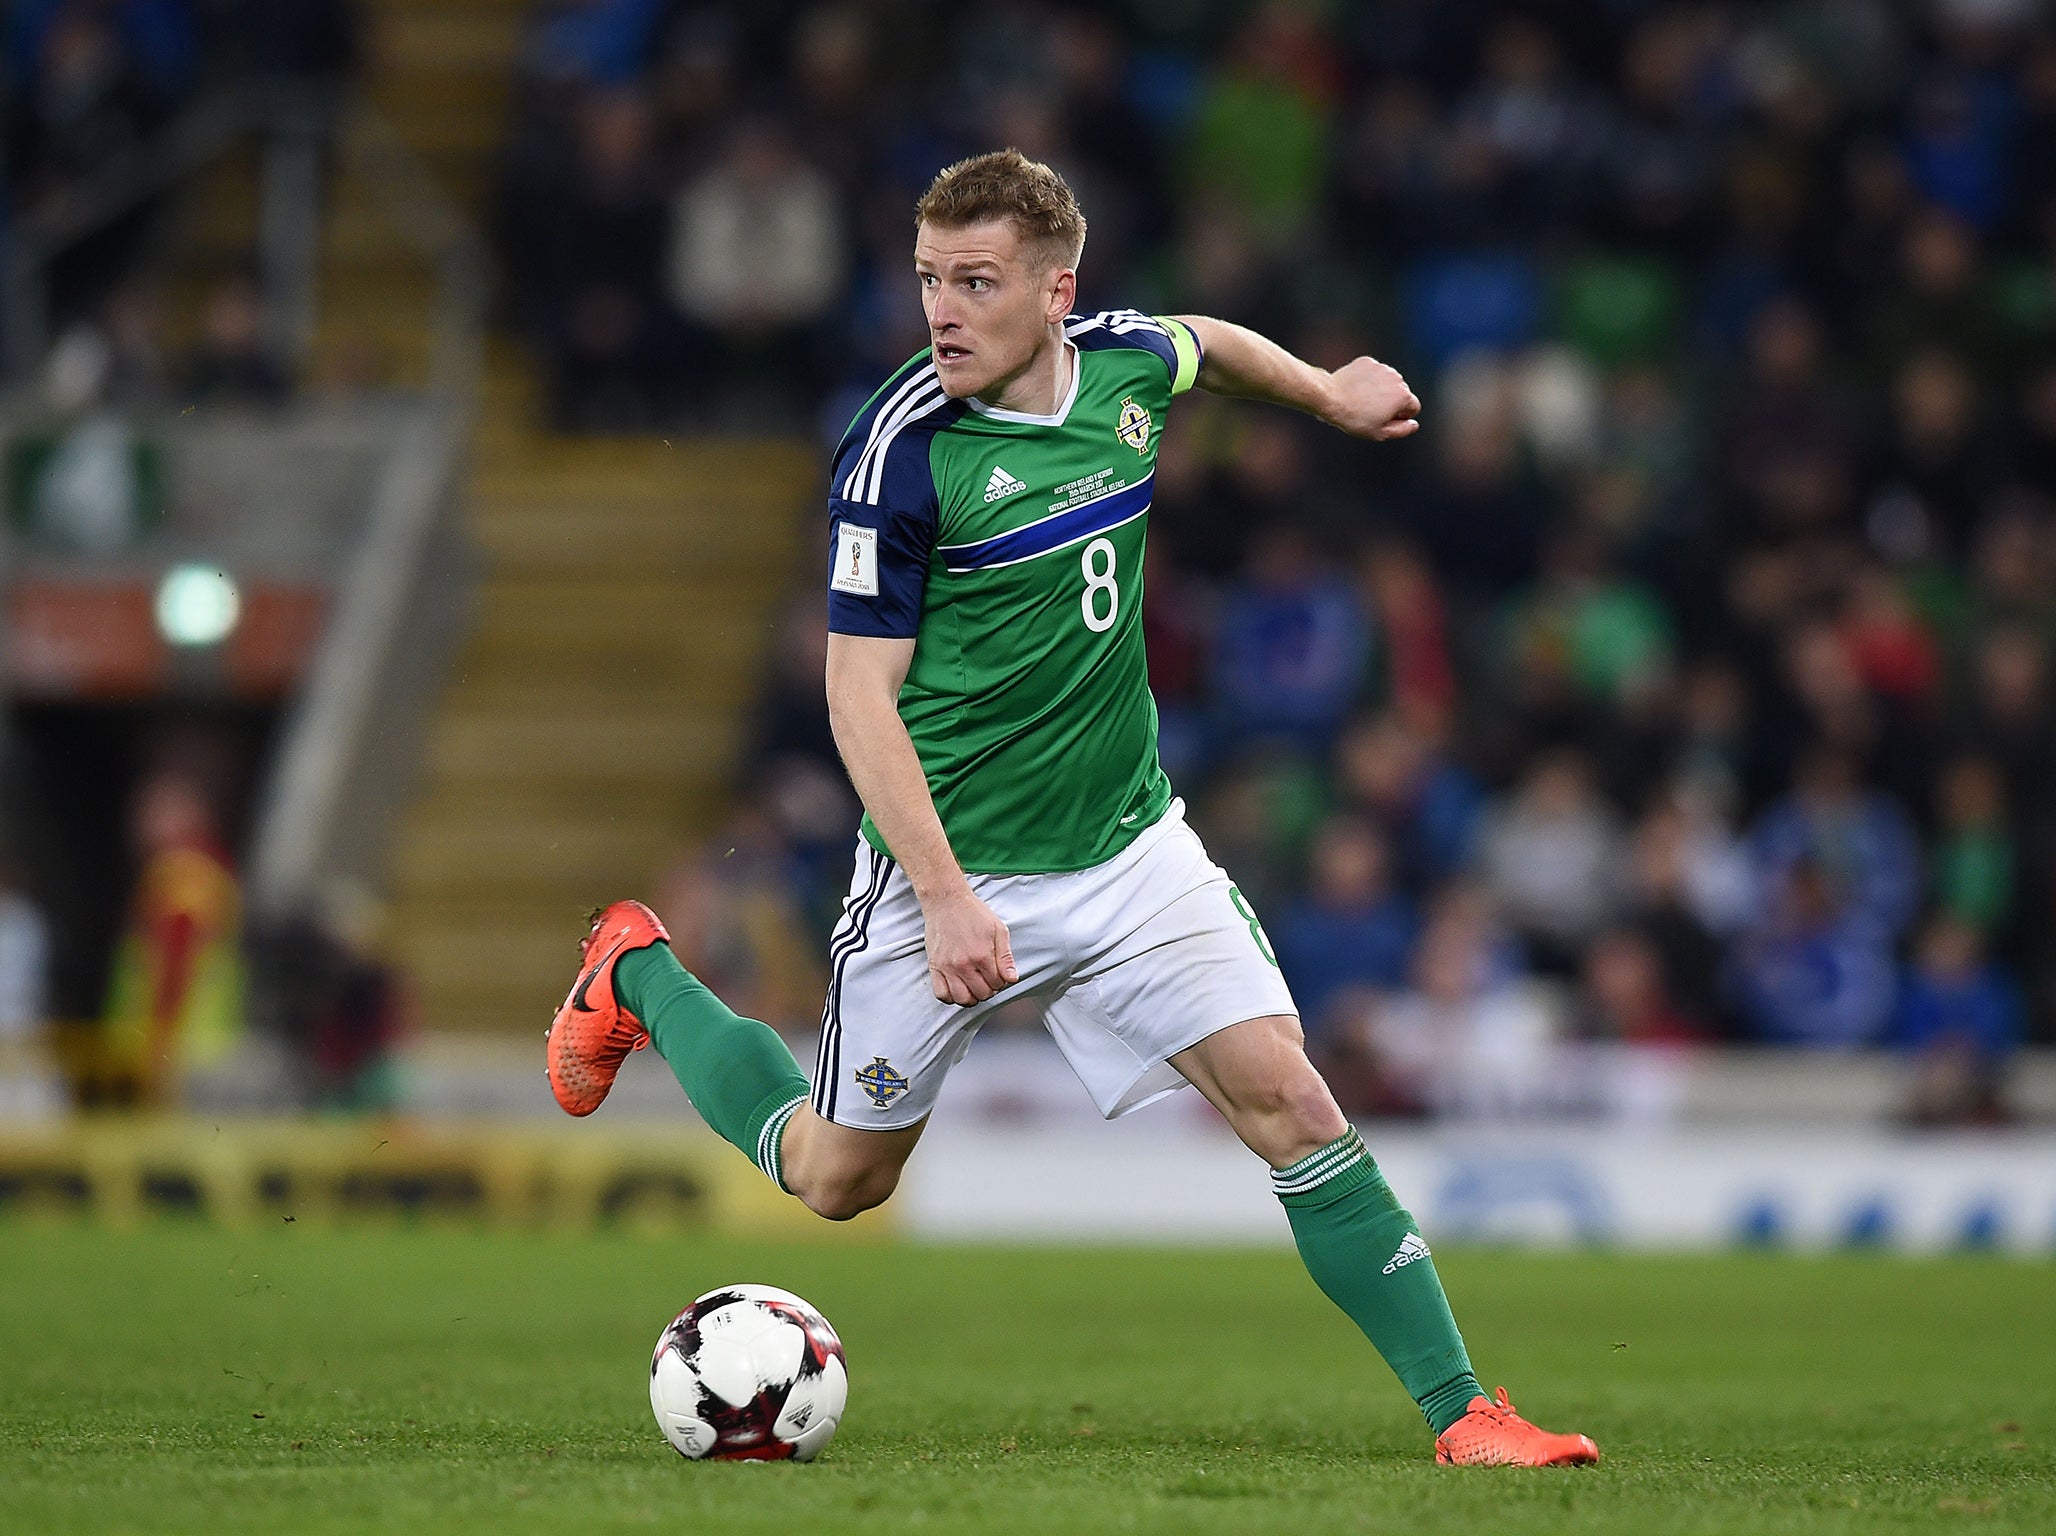 Davis is one of Northern Ireland's most influential and important players